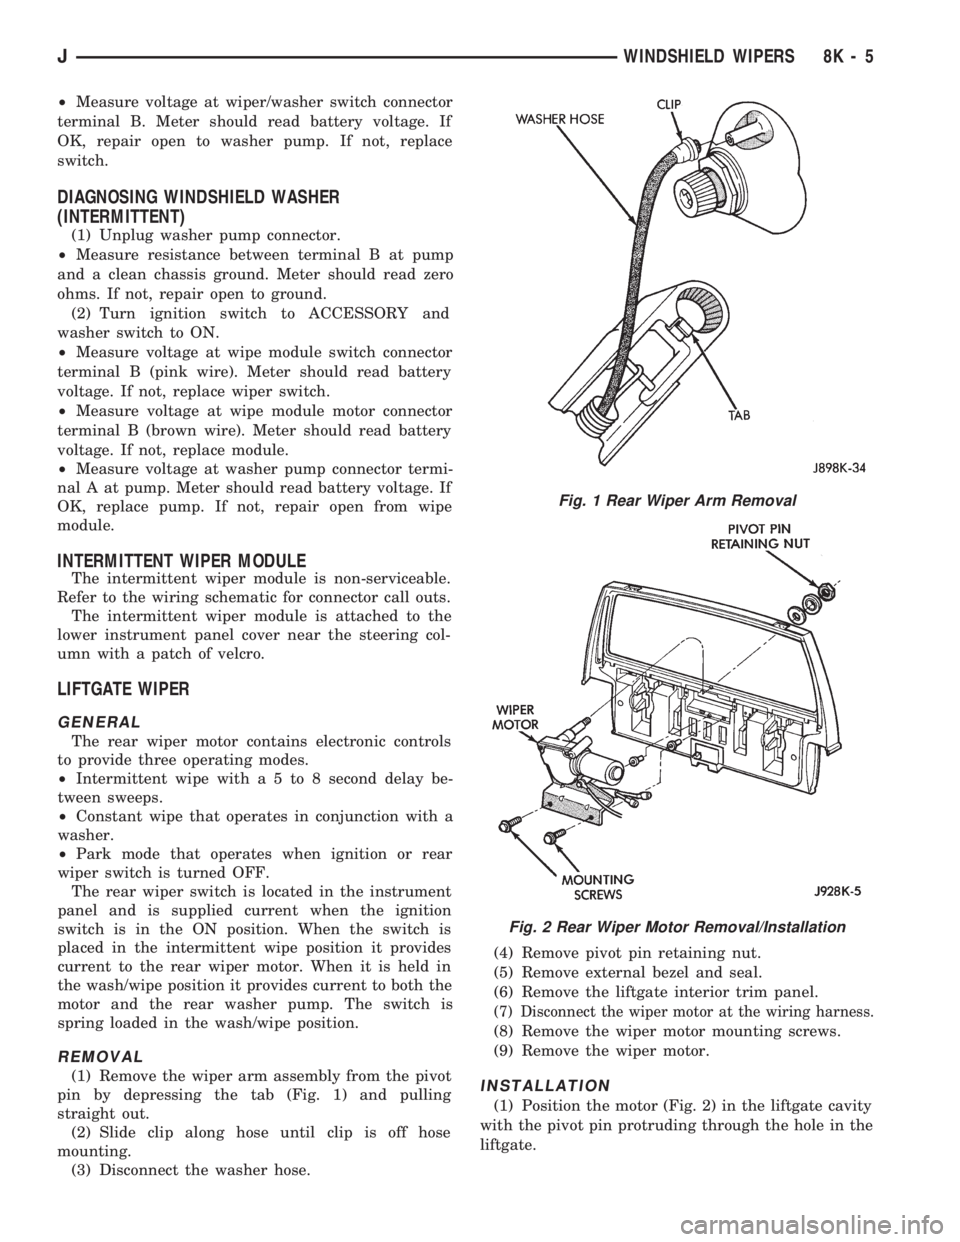 JEEP CHEROKEE 1994  Service Repair Manual ²Measure voltage at wiper/washer switch connector
terminal B. Meter should read battery voltage. If
OK, repair open to washer pump. If not, replace
switch.
DIAGNOSING WINDSHIELD WASHER
(INTERMITTENT)